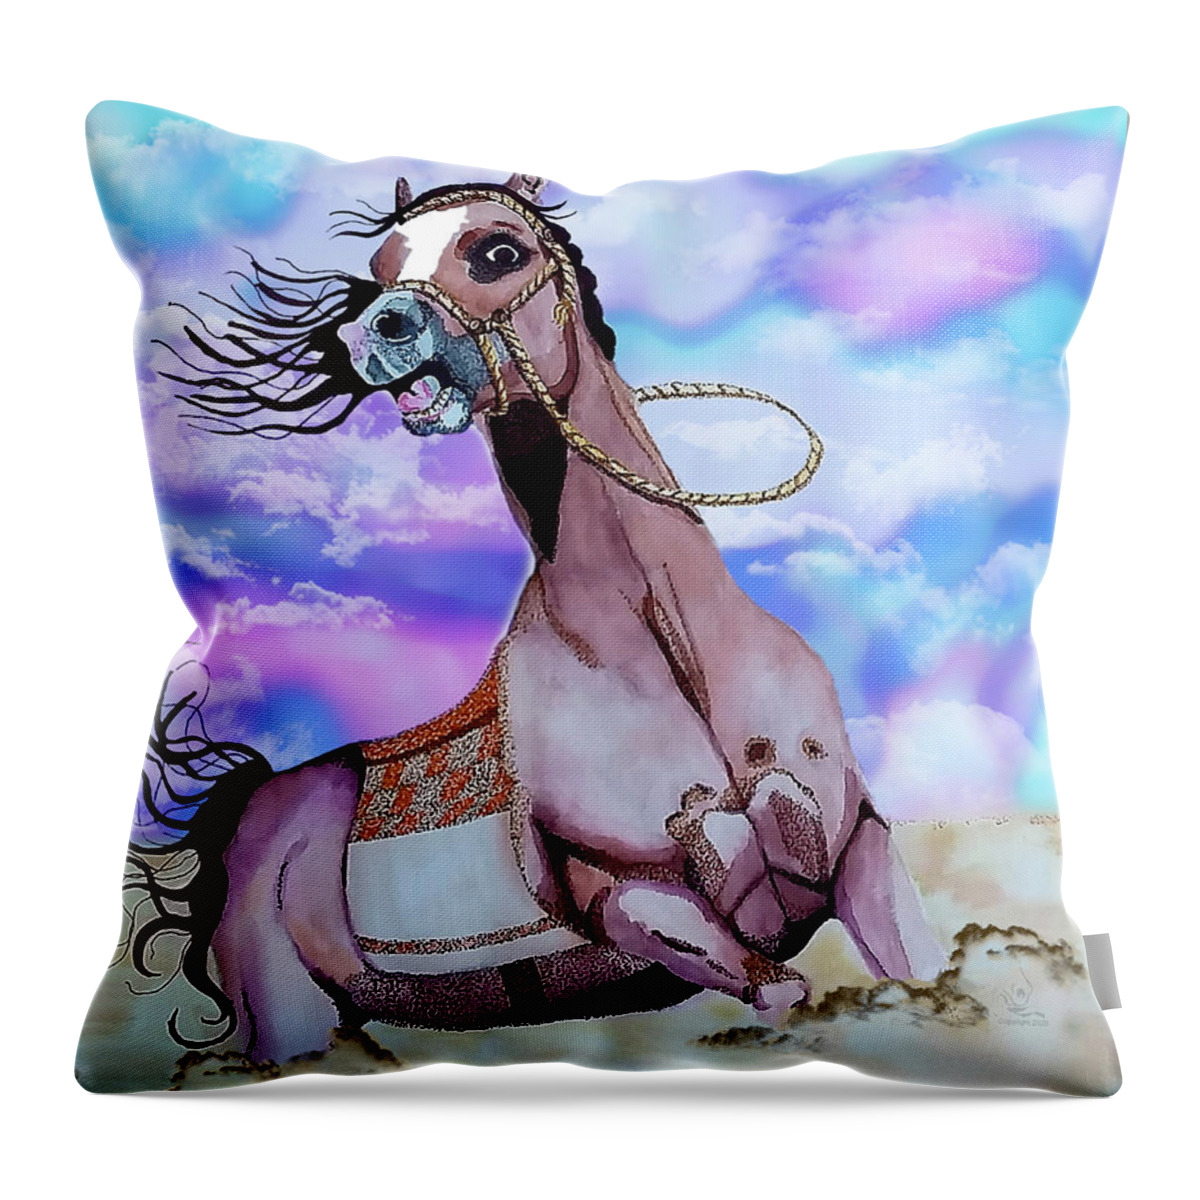 Horse Skethes Throw Pillow featuring the painting Frightened Horse by Equus Artisan